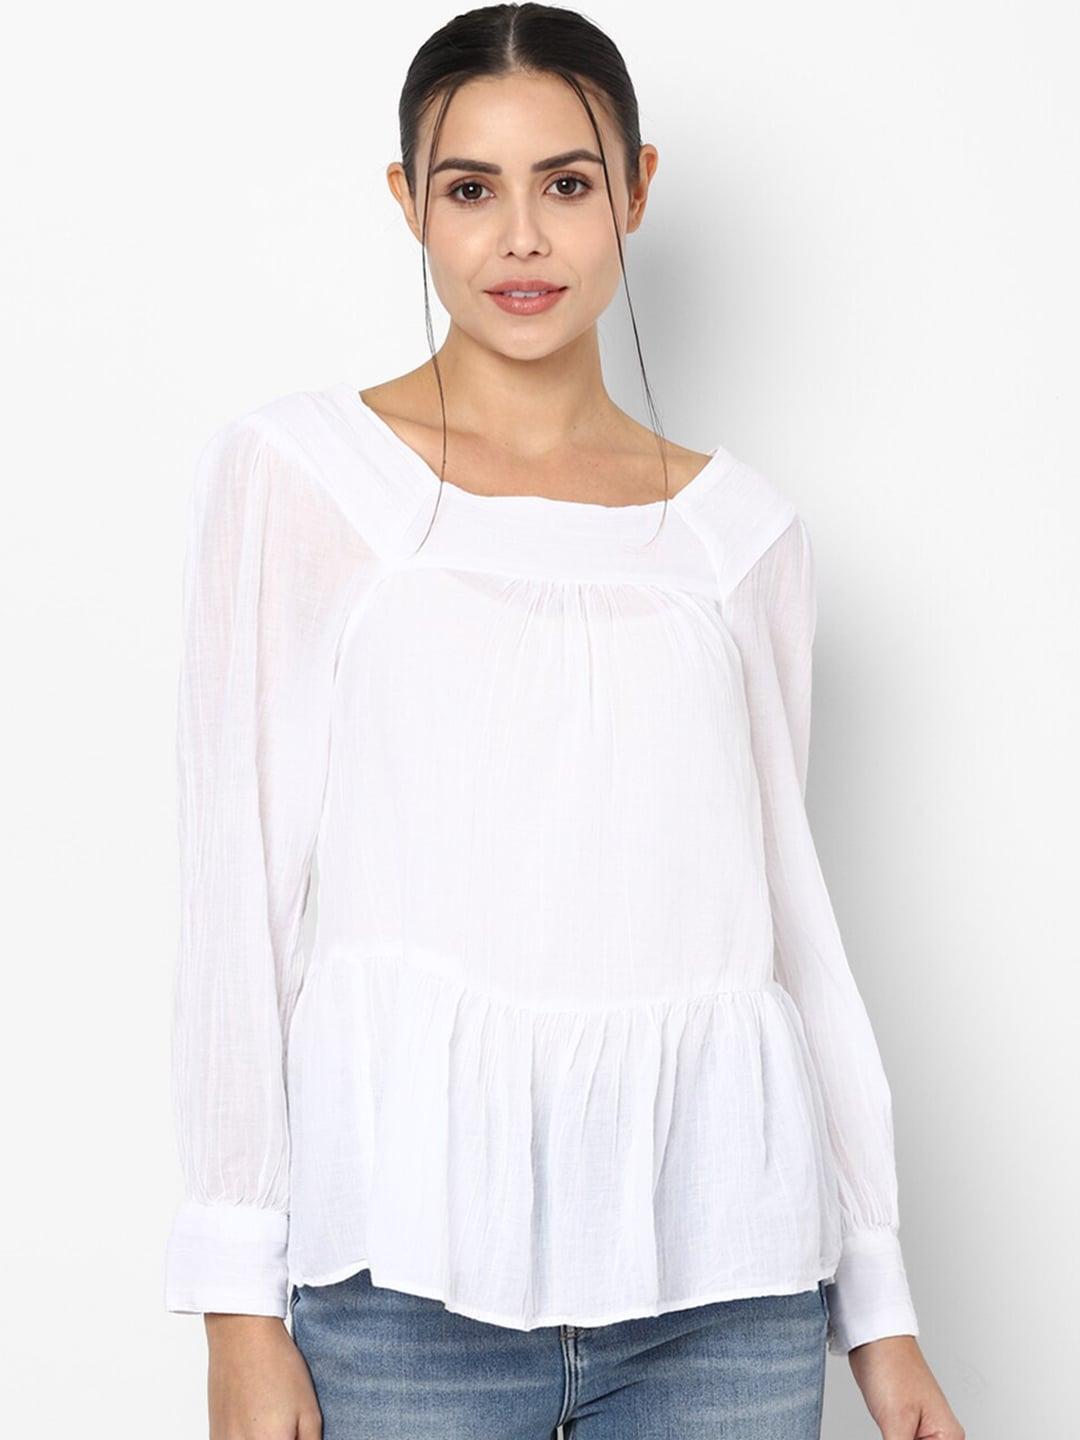 american-eagle-outfitters-white-pure-cotton-square-neck-peplum-top